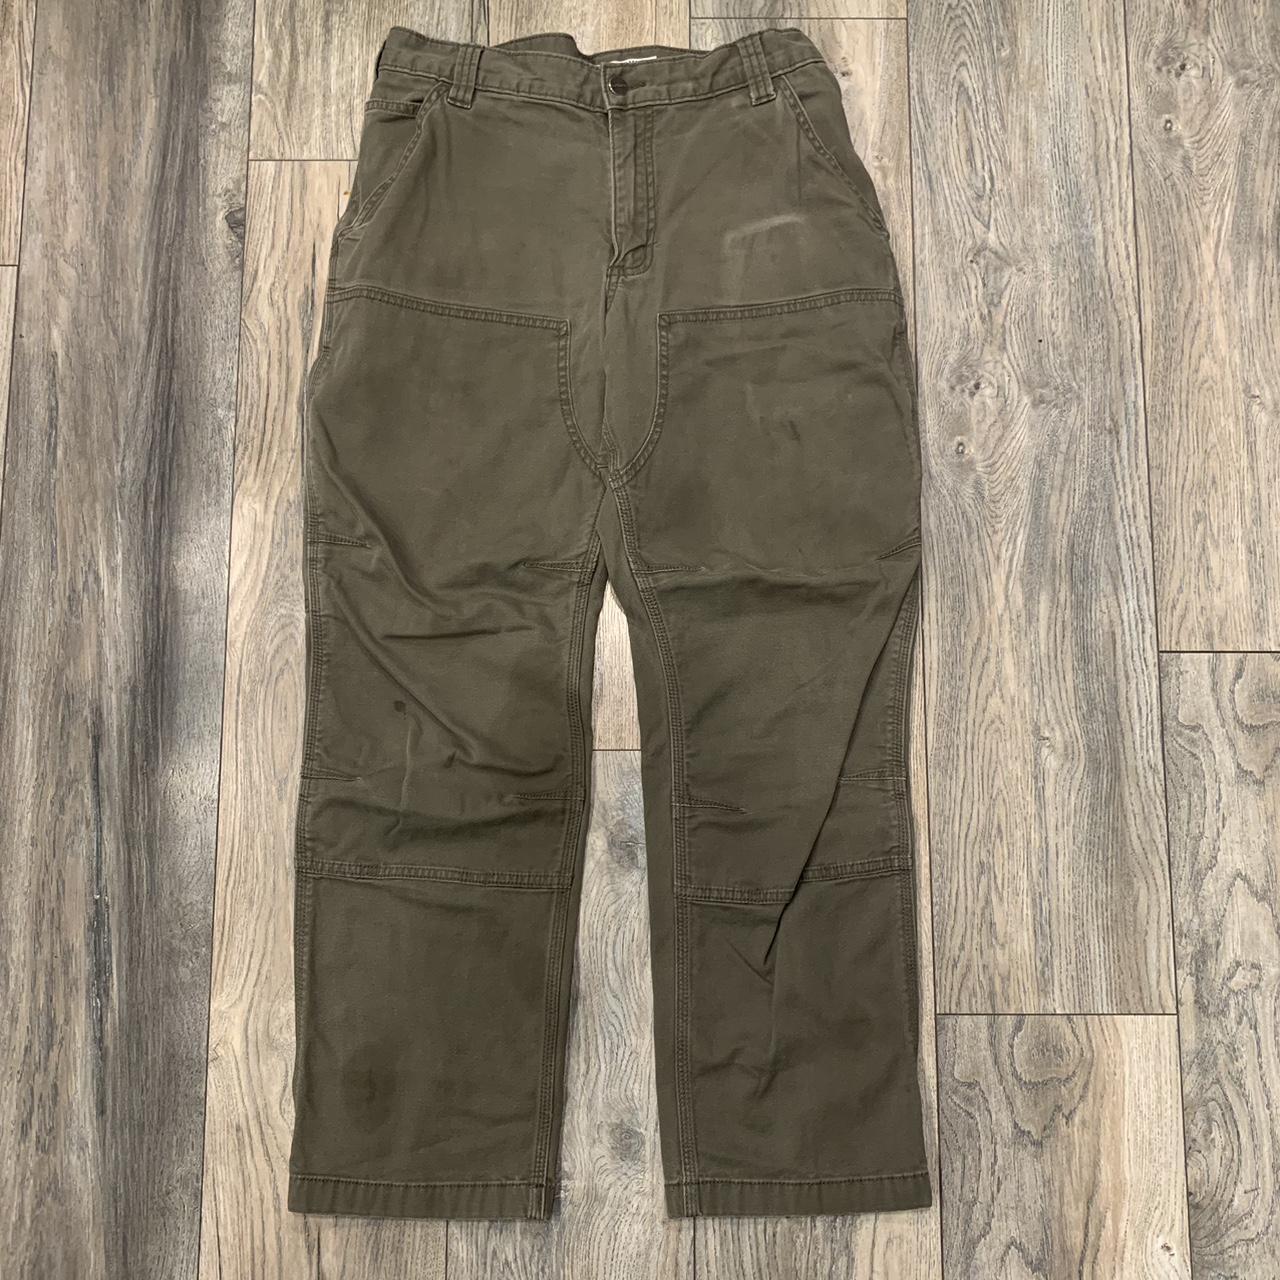 Carhartt Double Knee Relaxed Fit jeans Clean olive... - Depop